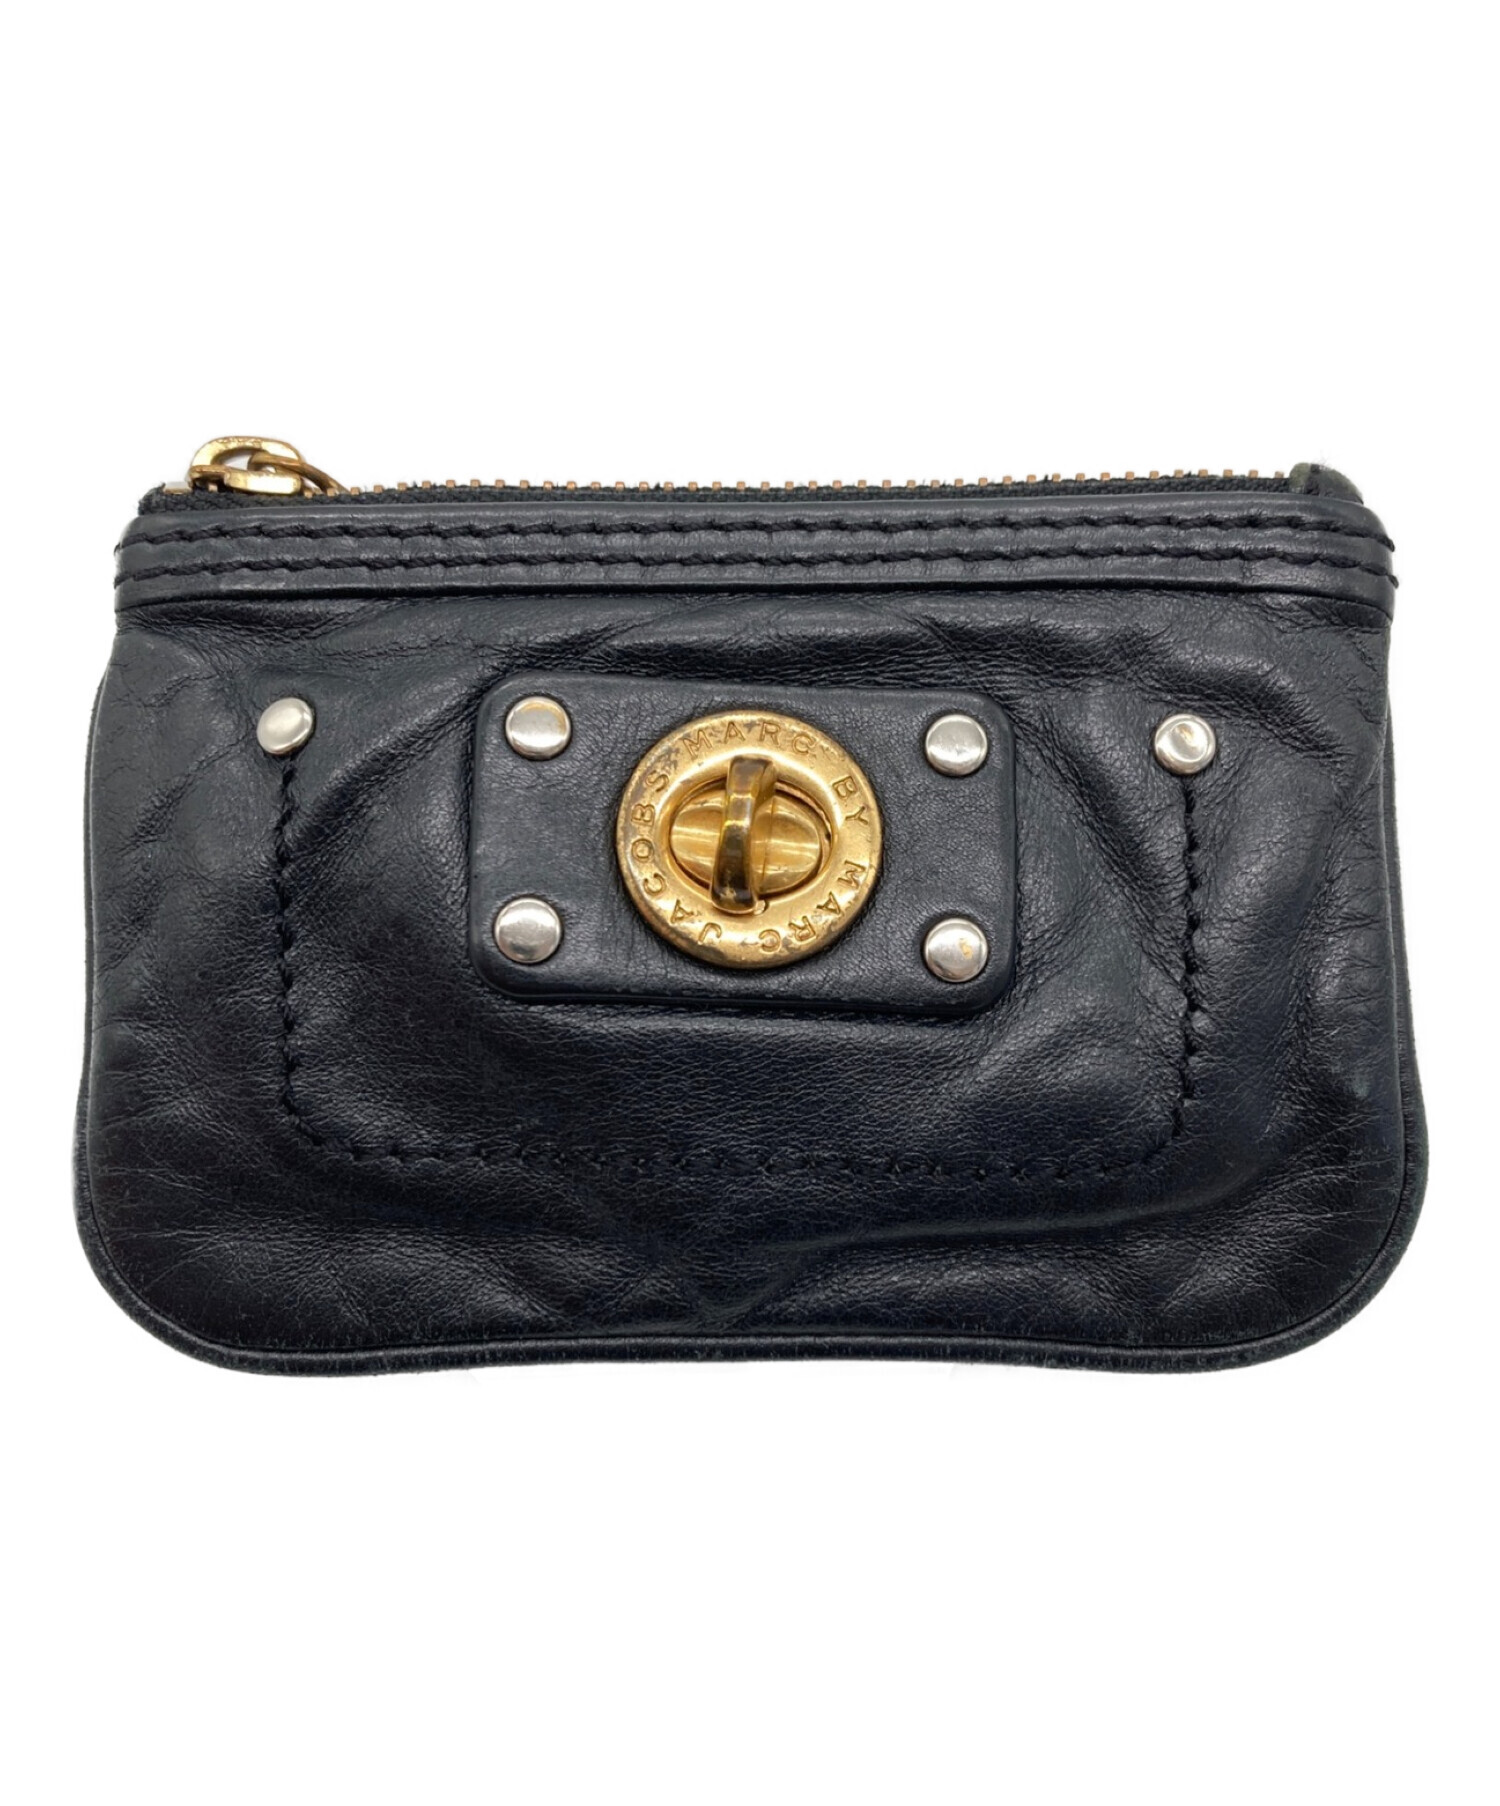 MARC BY MARC JACOBS パスポートケース-